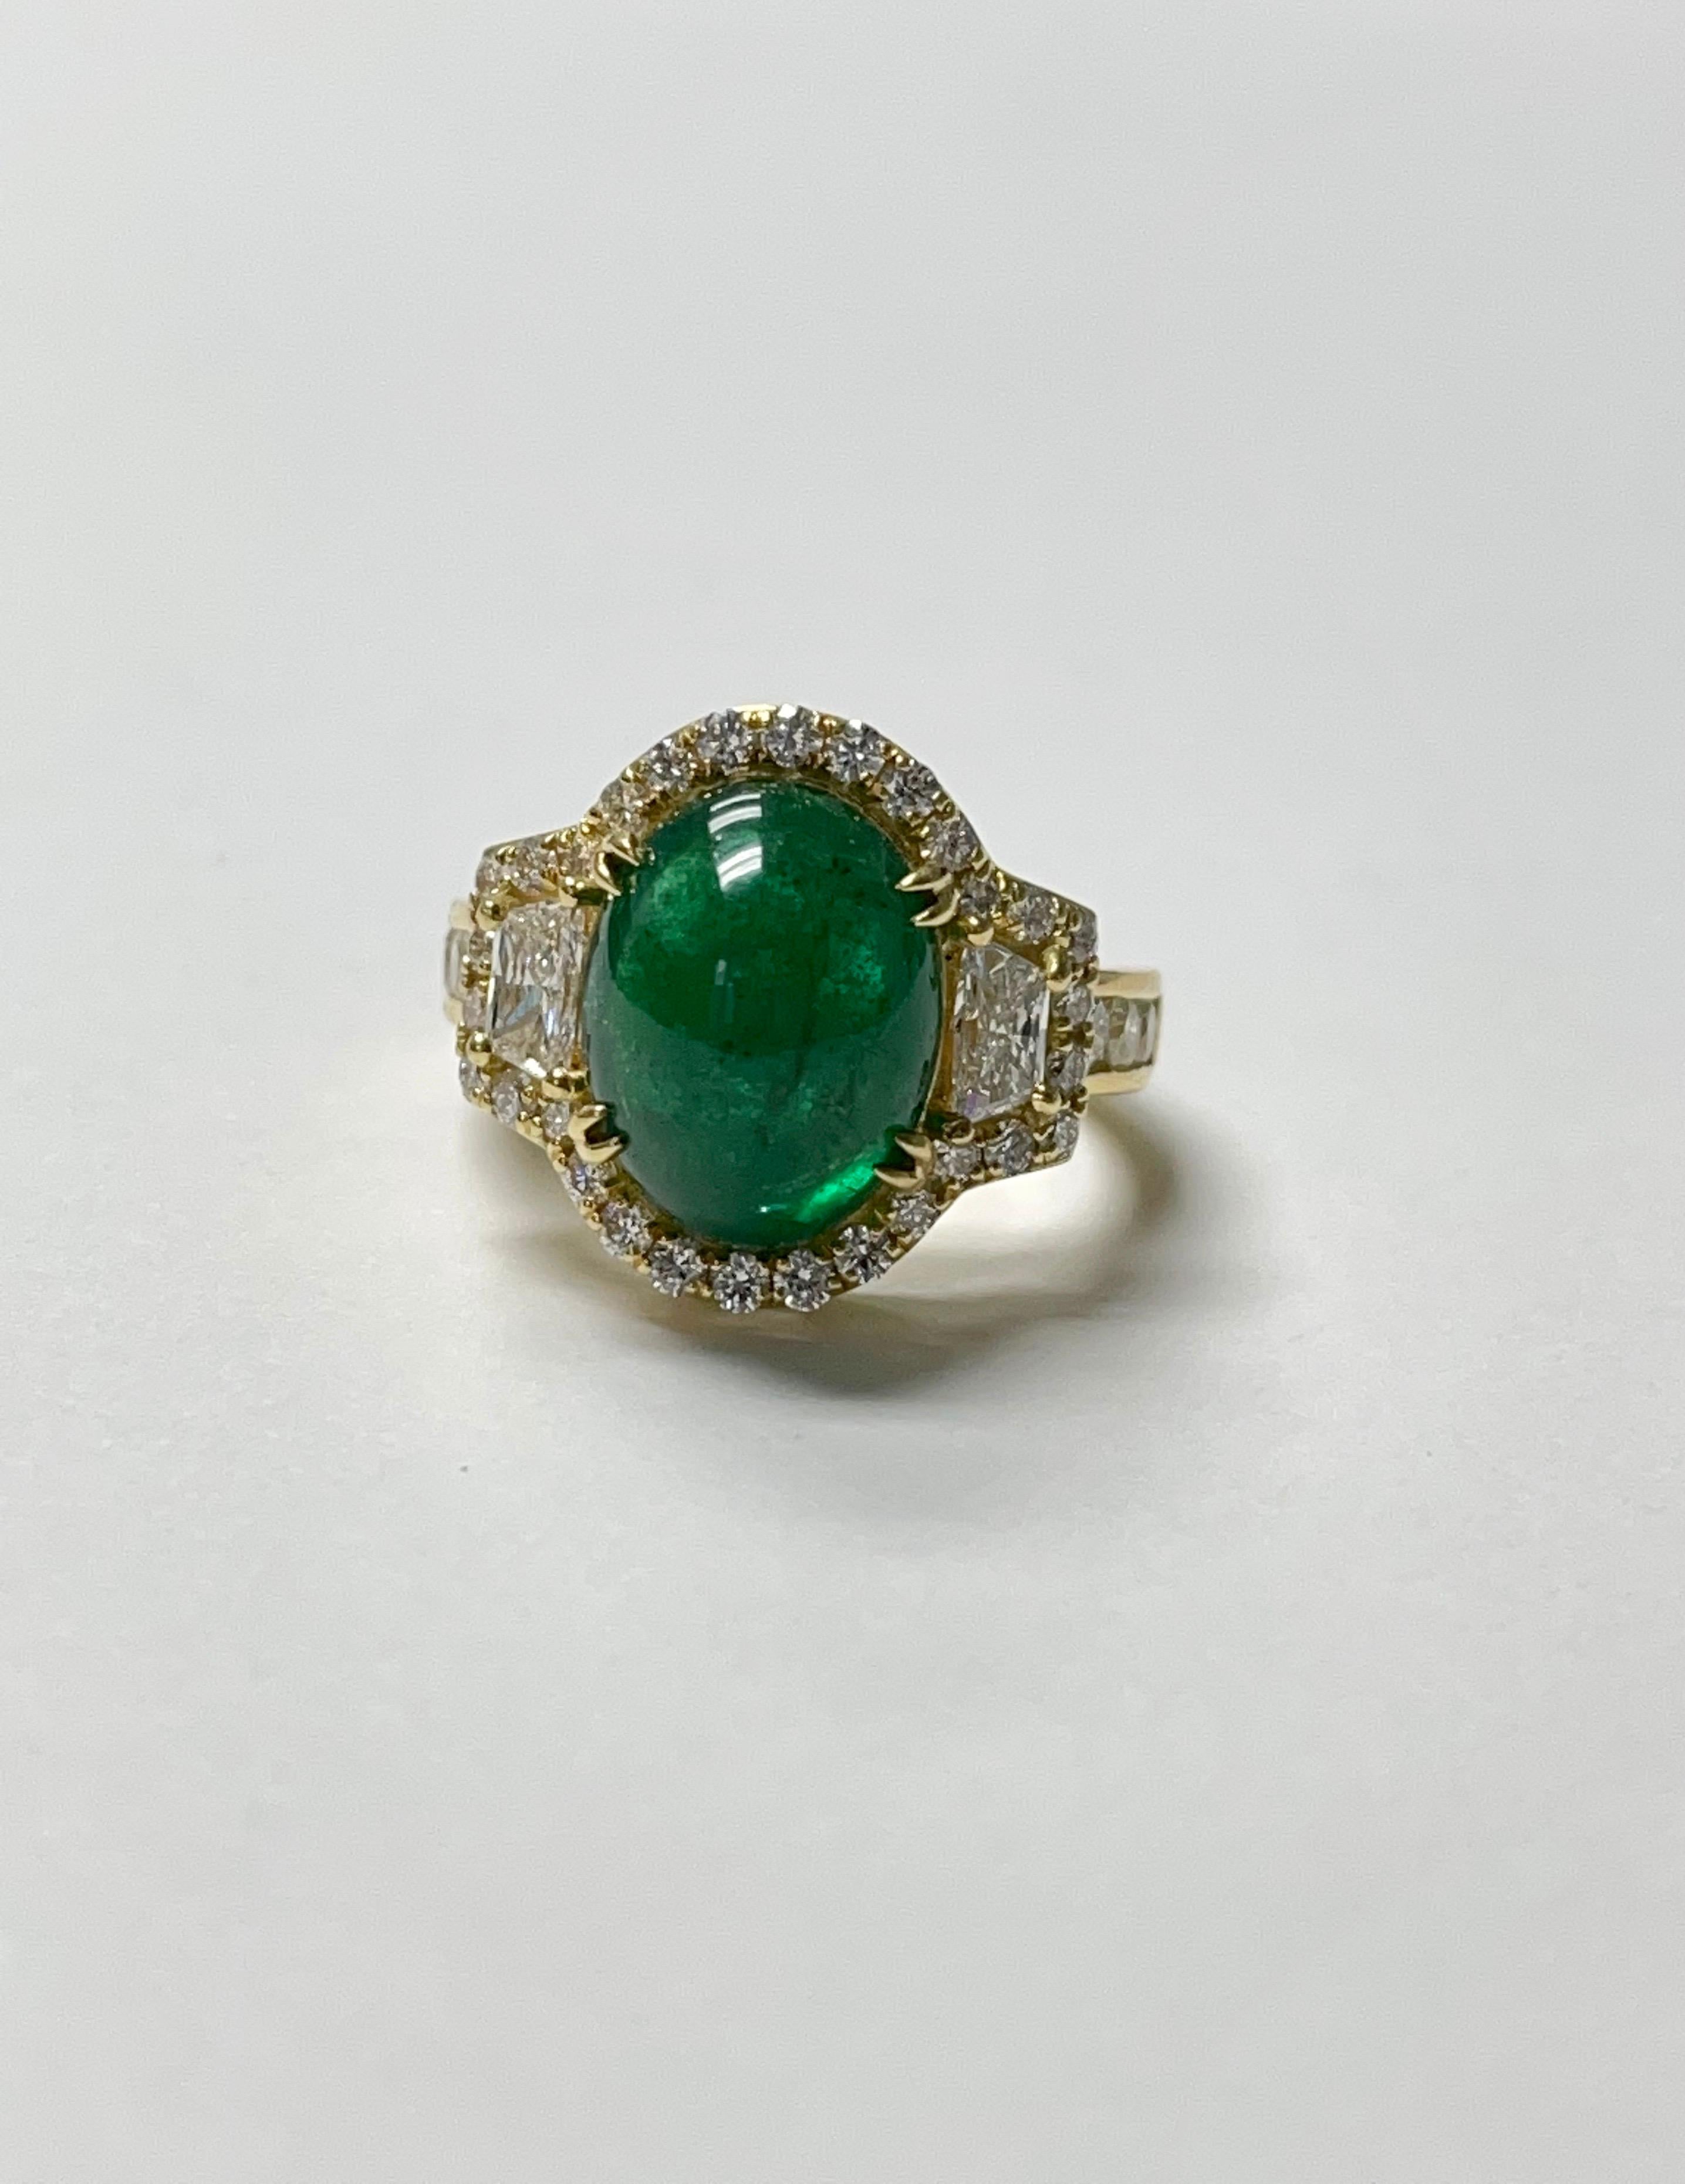 Elegant and classy oval cabochon emerald ring handcrafted in 18 k yellow gold.
The details are as follows : 
Emerald weight : 6.08 carat 
Diamond weight : 1.29 carat 
Metal : 18k yellow gold 
Measurements : ring head : 3/4 inch 